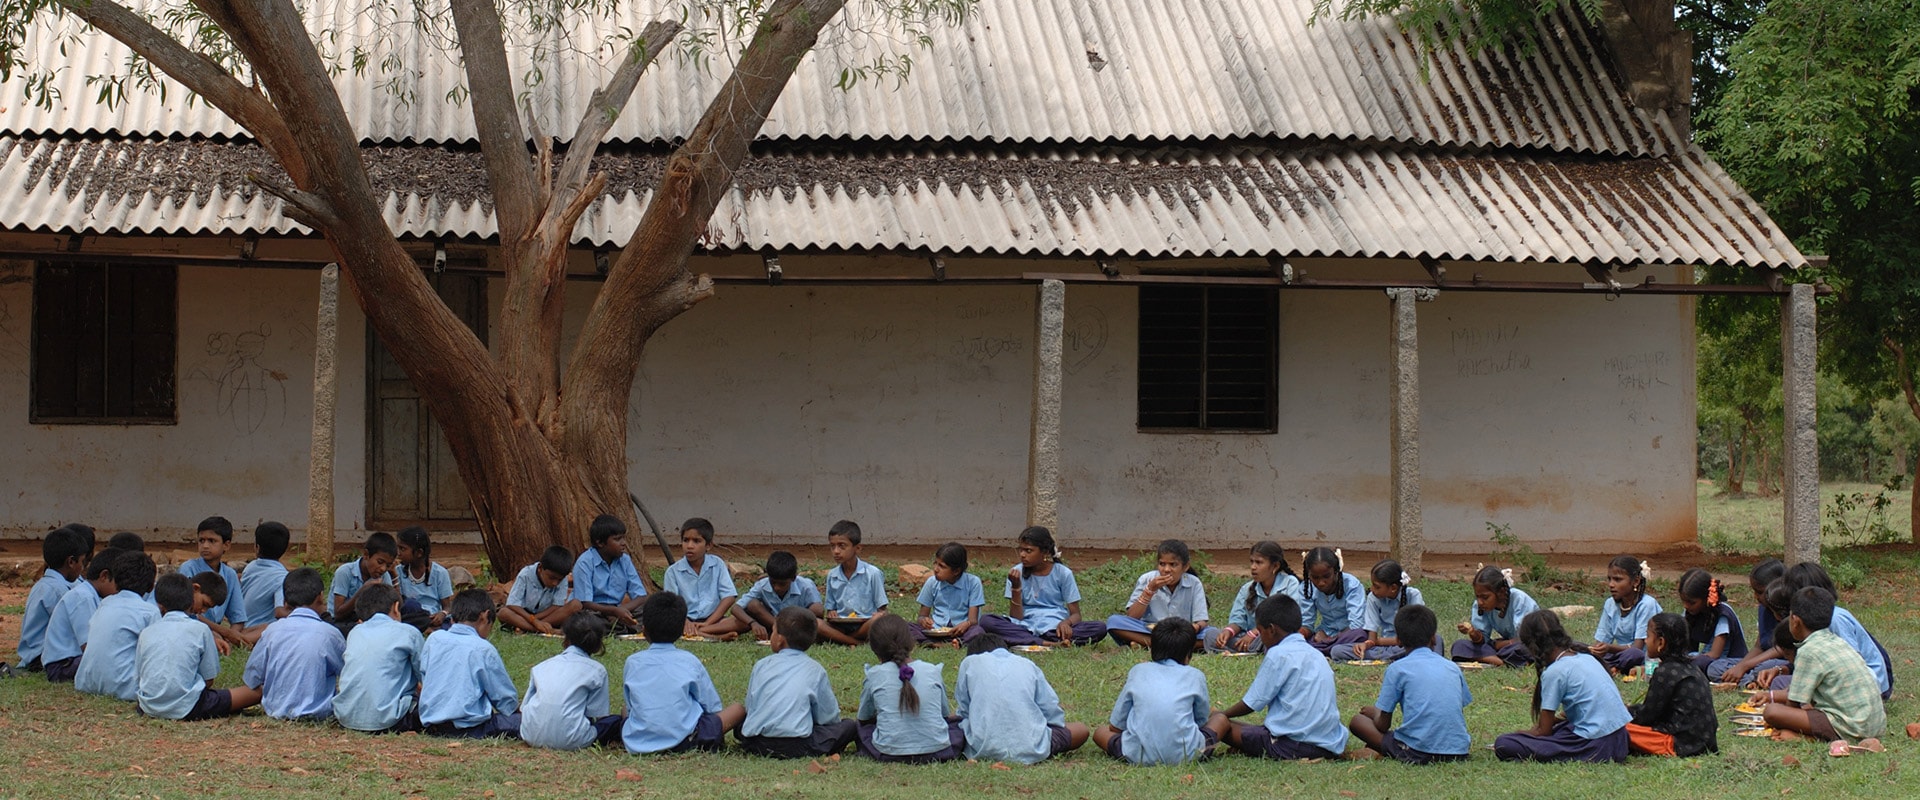 Children in a huge circle in the lawn eating an Akshaya Patra-provided meal.